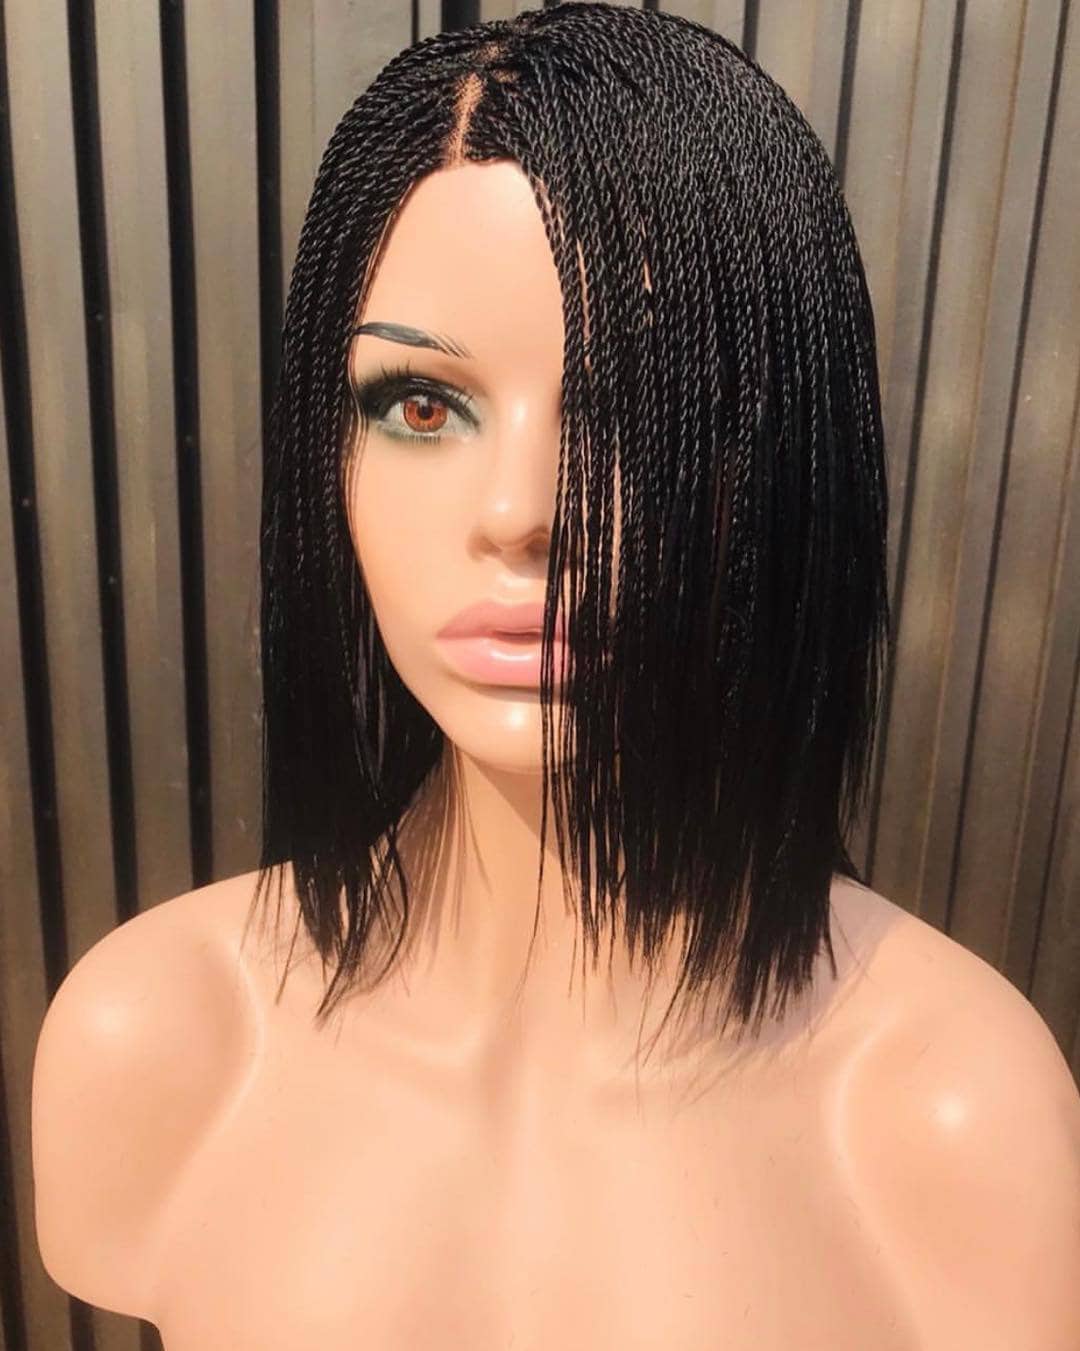 3 in 1 bundle of braided wigs knotless braid wig Cornrow wig Micro braids Synthetic black lace front braided wigs for black women dreadlocks - BRAIDED WIG BOSS